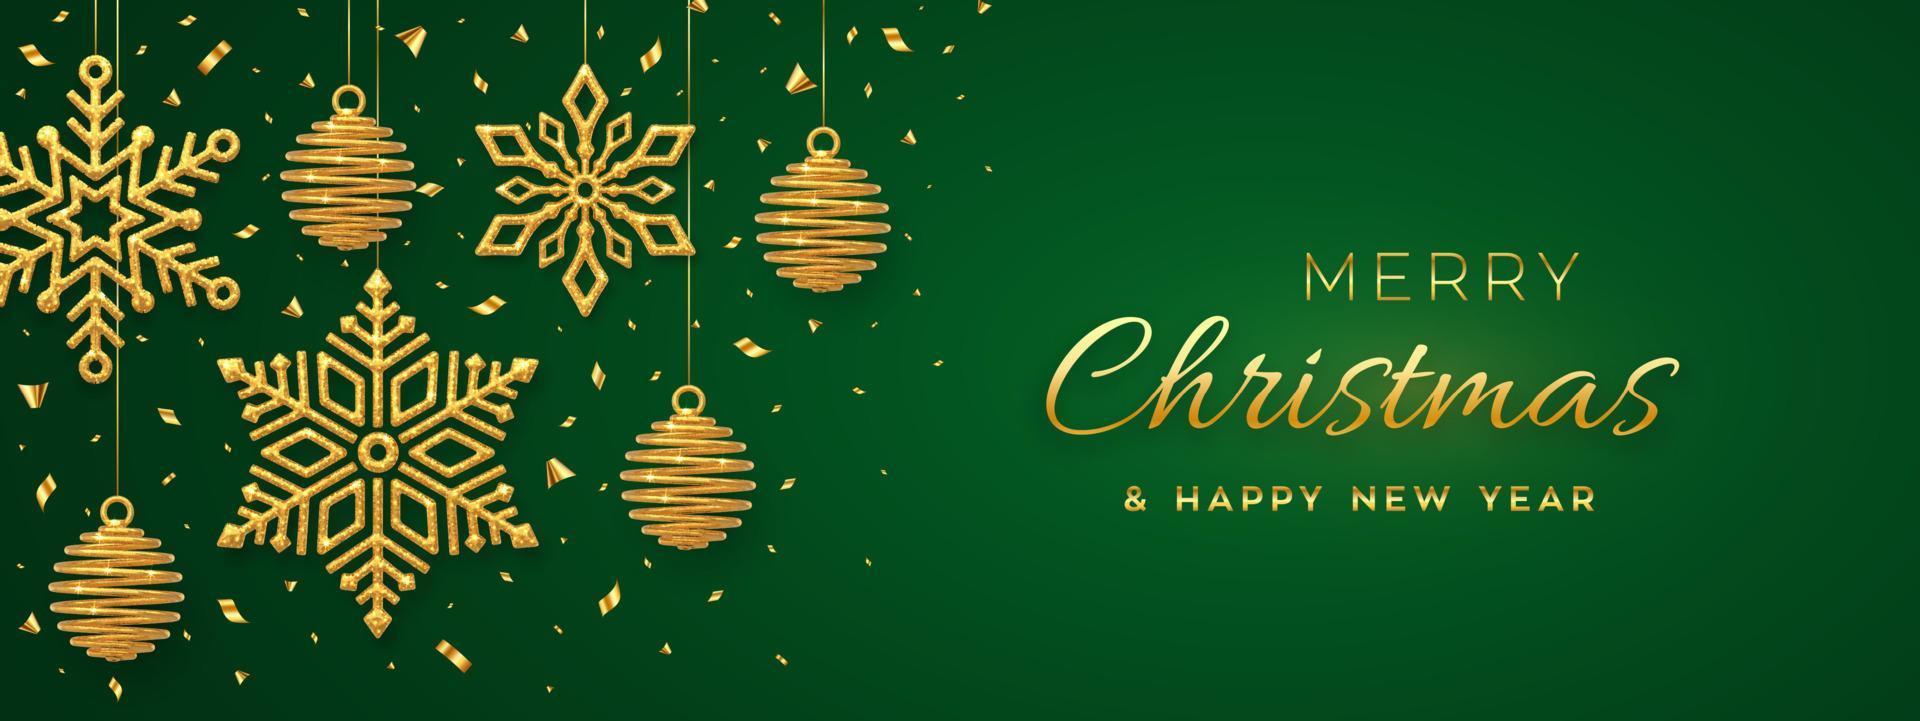 Christmas green background with hanging shining golden snowflakes and balls. Merry christmas greeting card. Holiday Xmas and New Year poster, web banner. Vector Illustration.